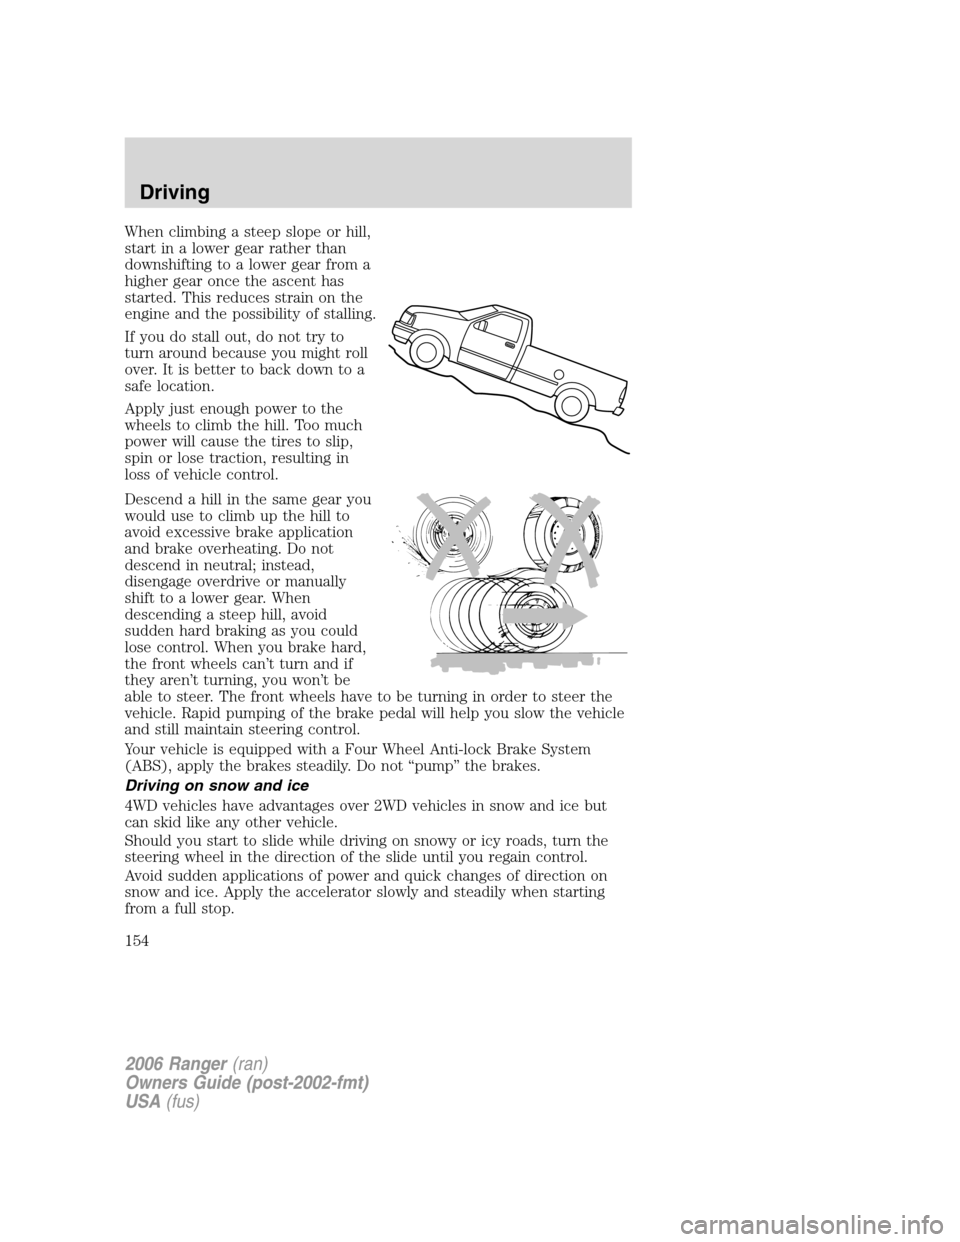 FORD RANGER 2006 2.G User Guide When climbing a steep slope or hill,
start in a lower gear rather than
downshifting to a lower gear from a
higher gear once the ascent has
started. This reduces strain on the
engine and the possibilit